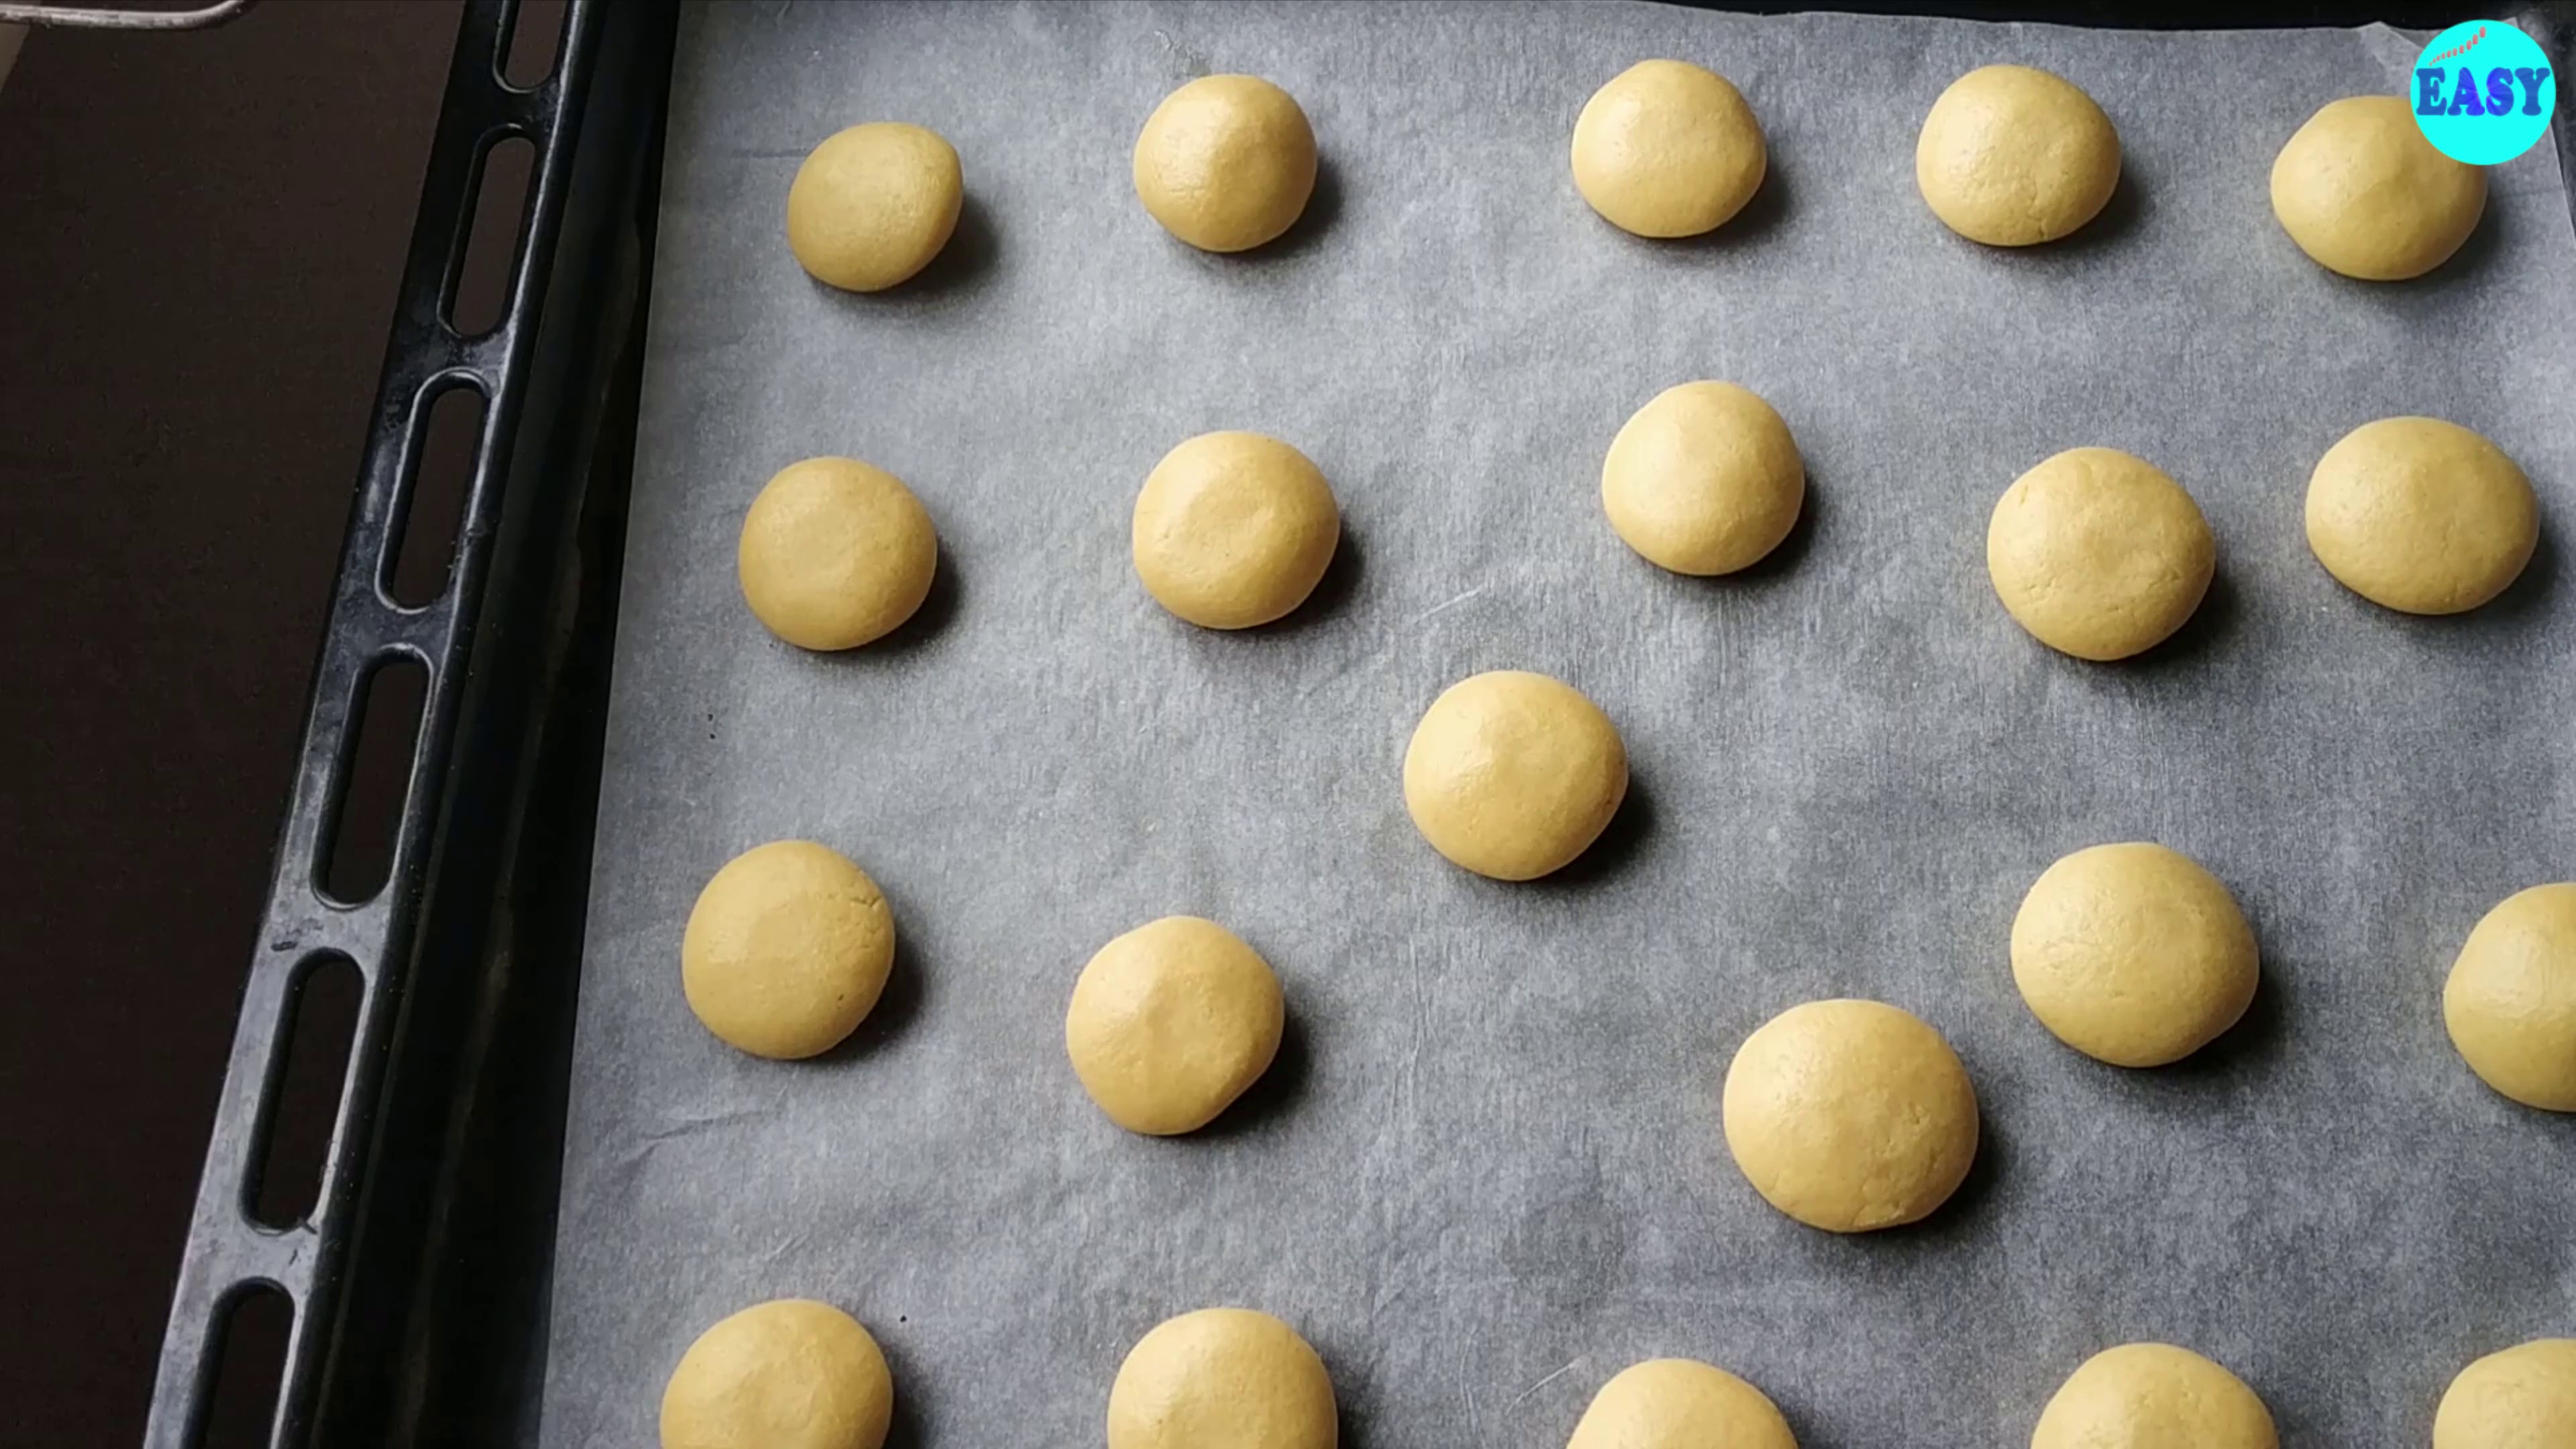 Step 6 - Place them in a baking tray lined with baking paper. Remember to keep some space between these as they expand while baking.